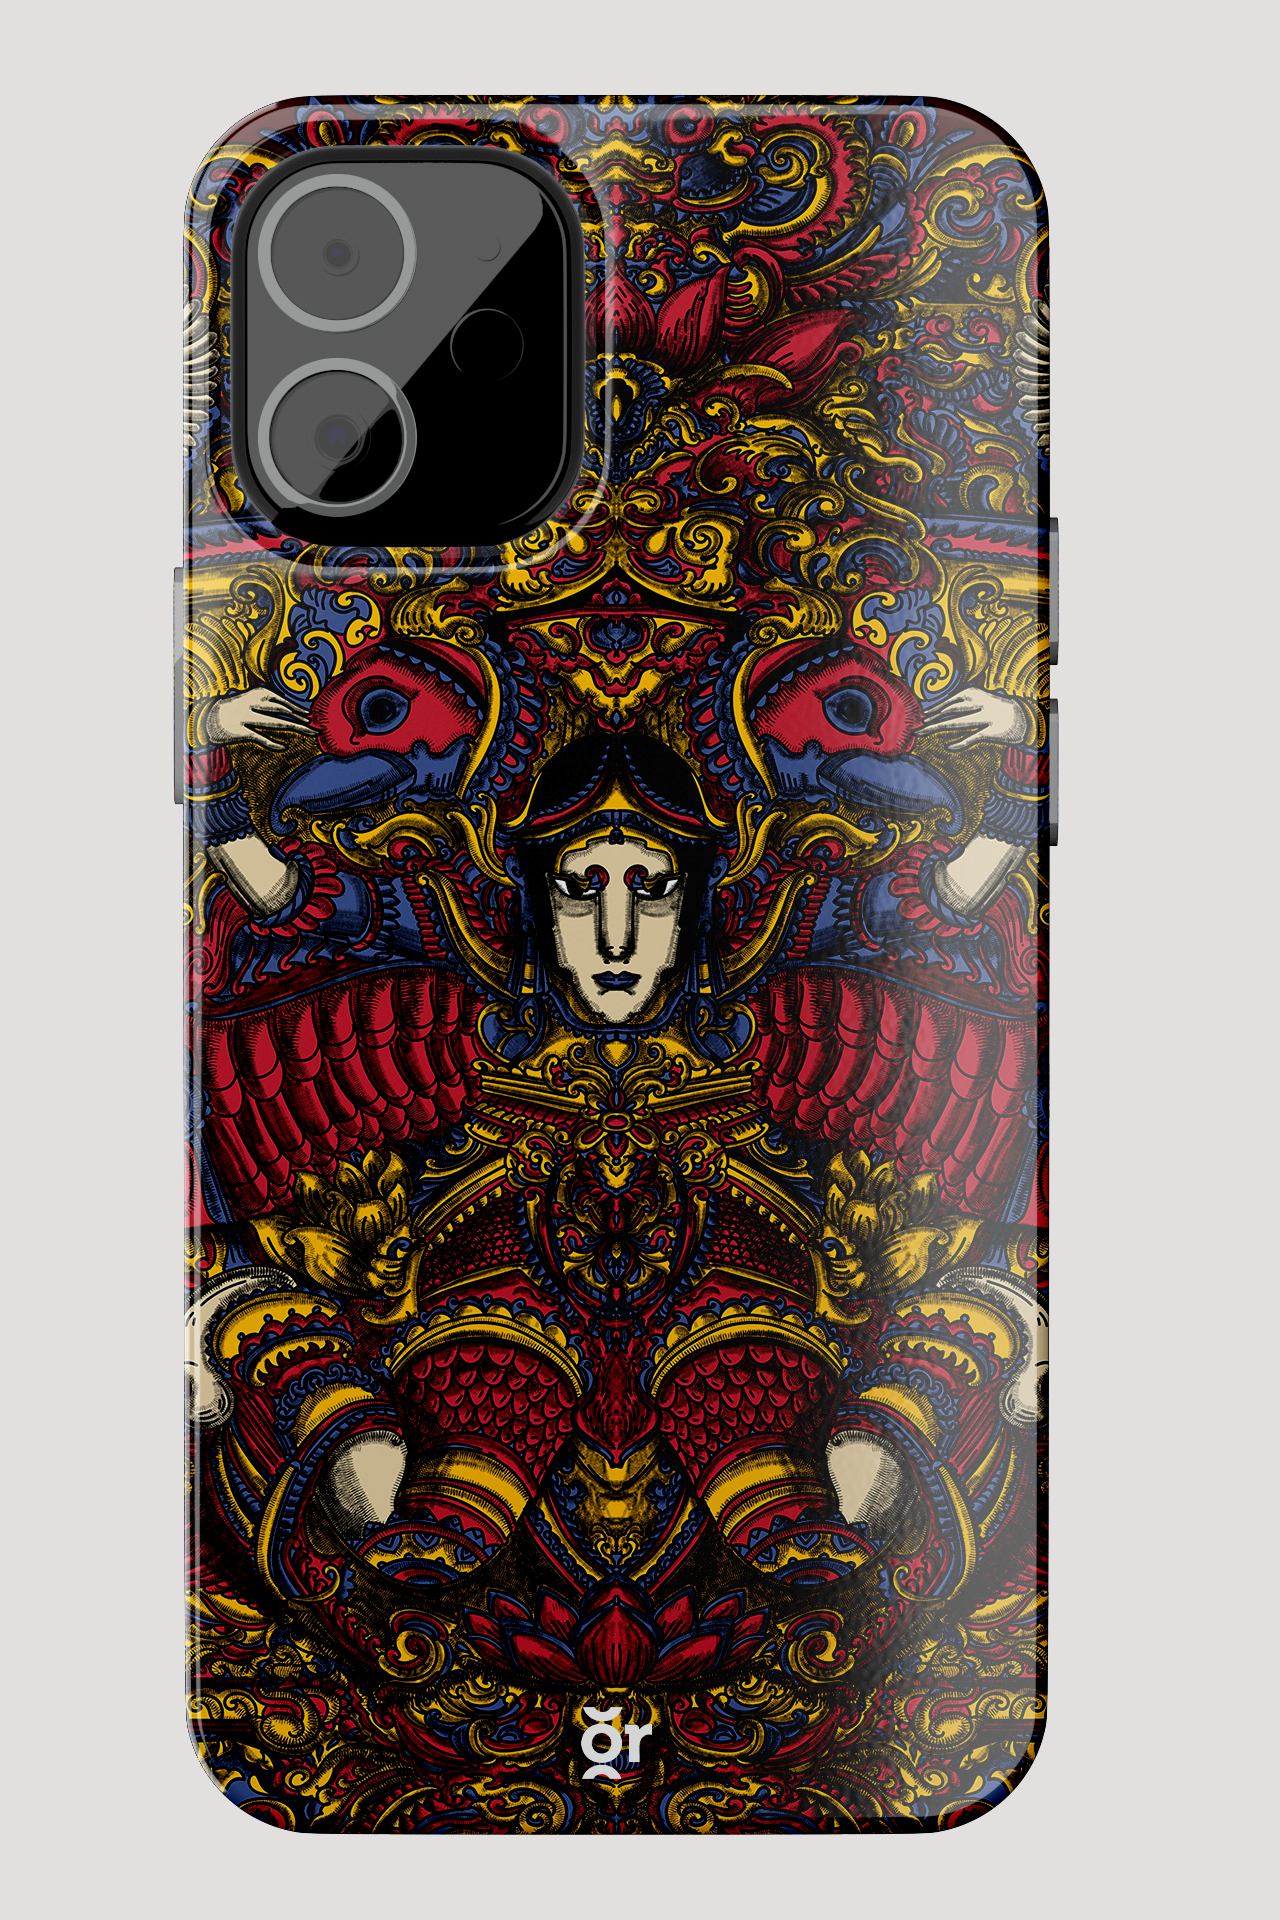 MOBILE CASE COVER: PATTERN 4